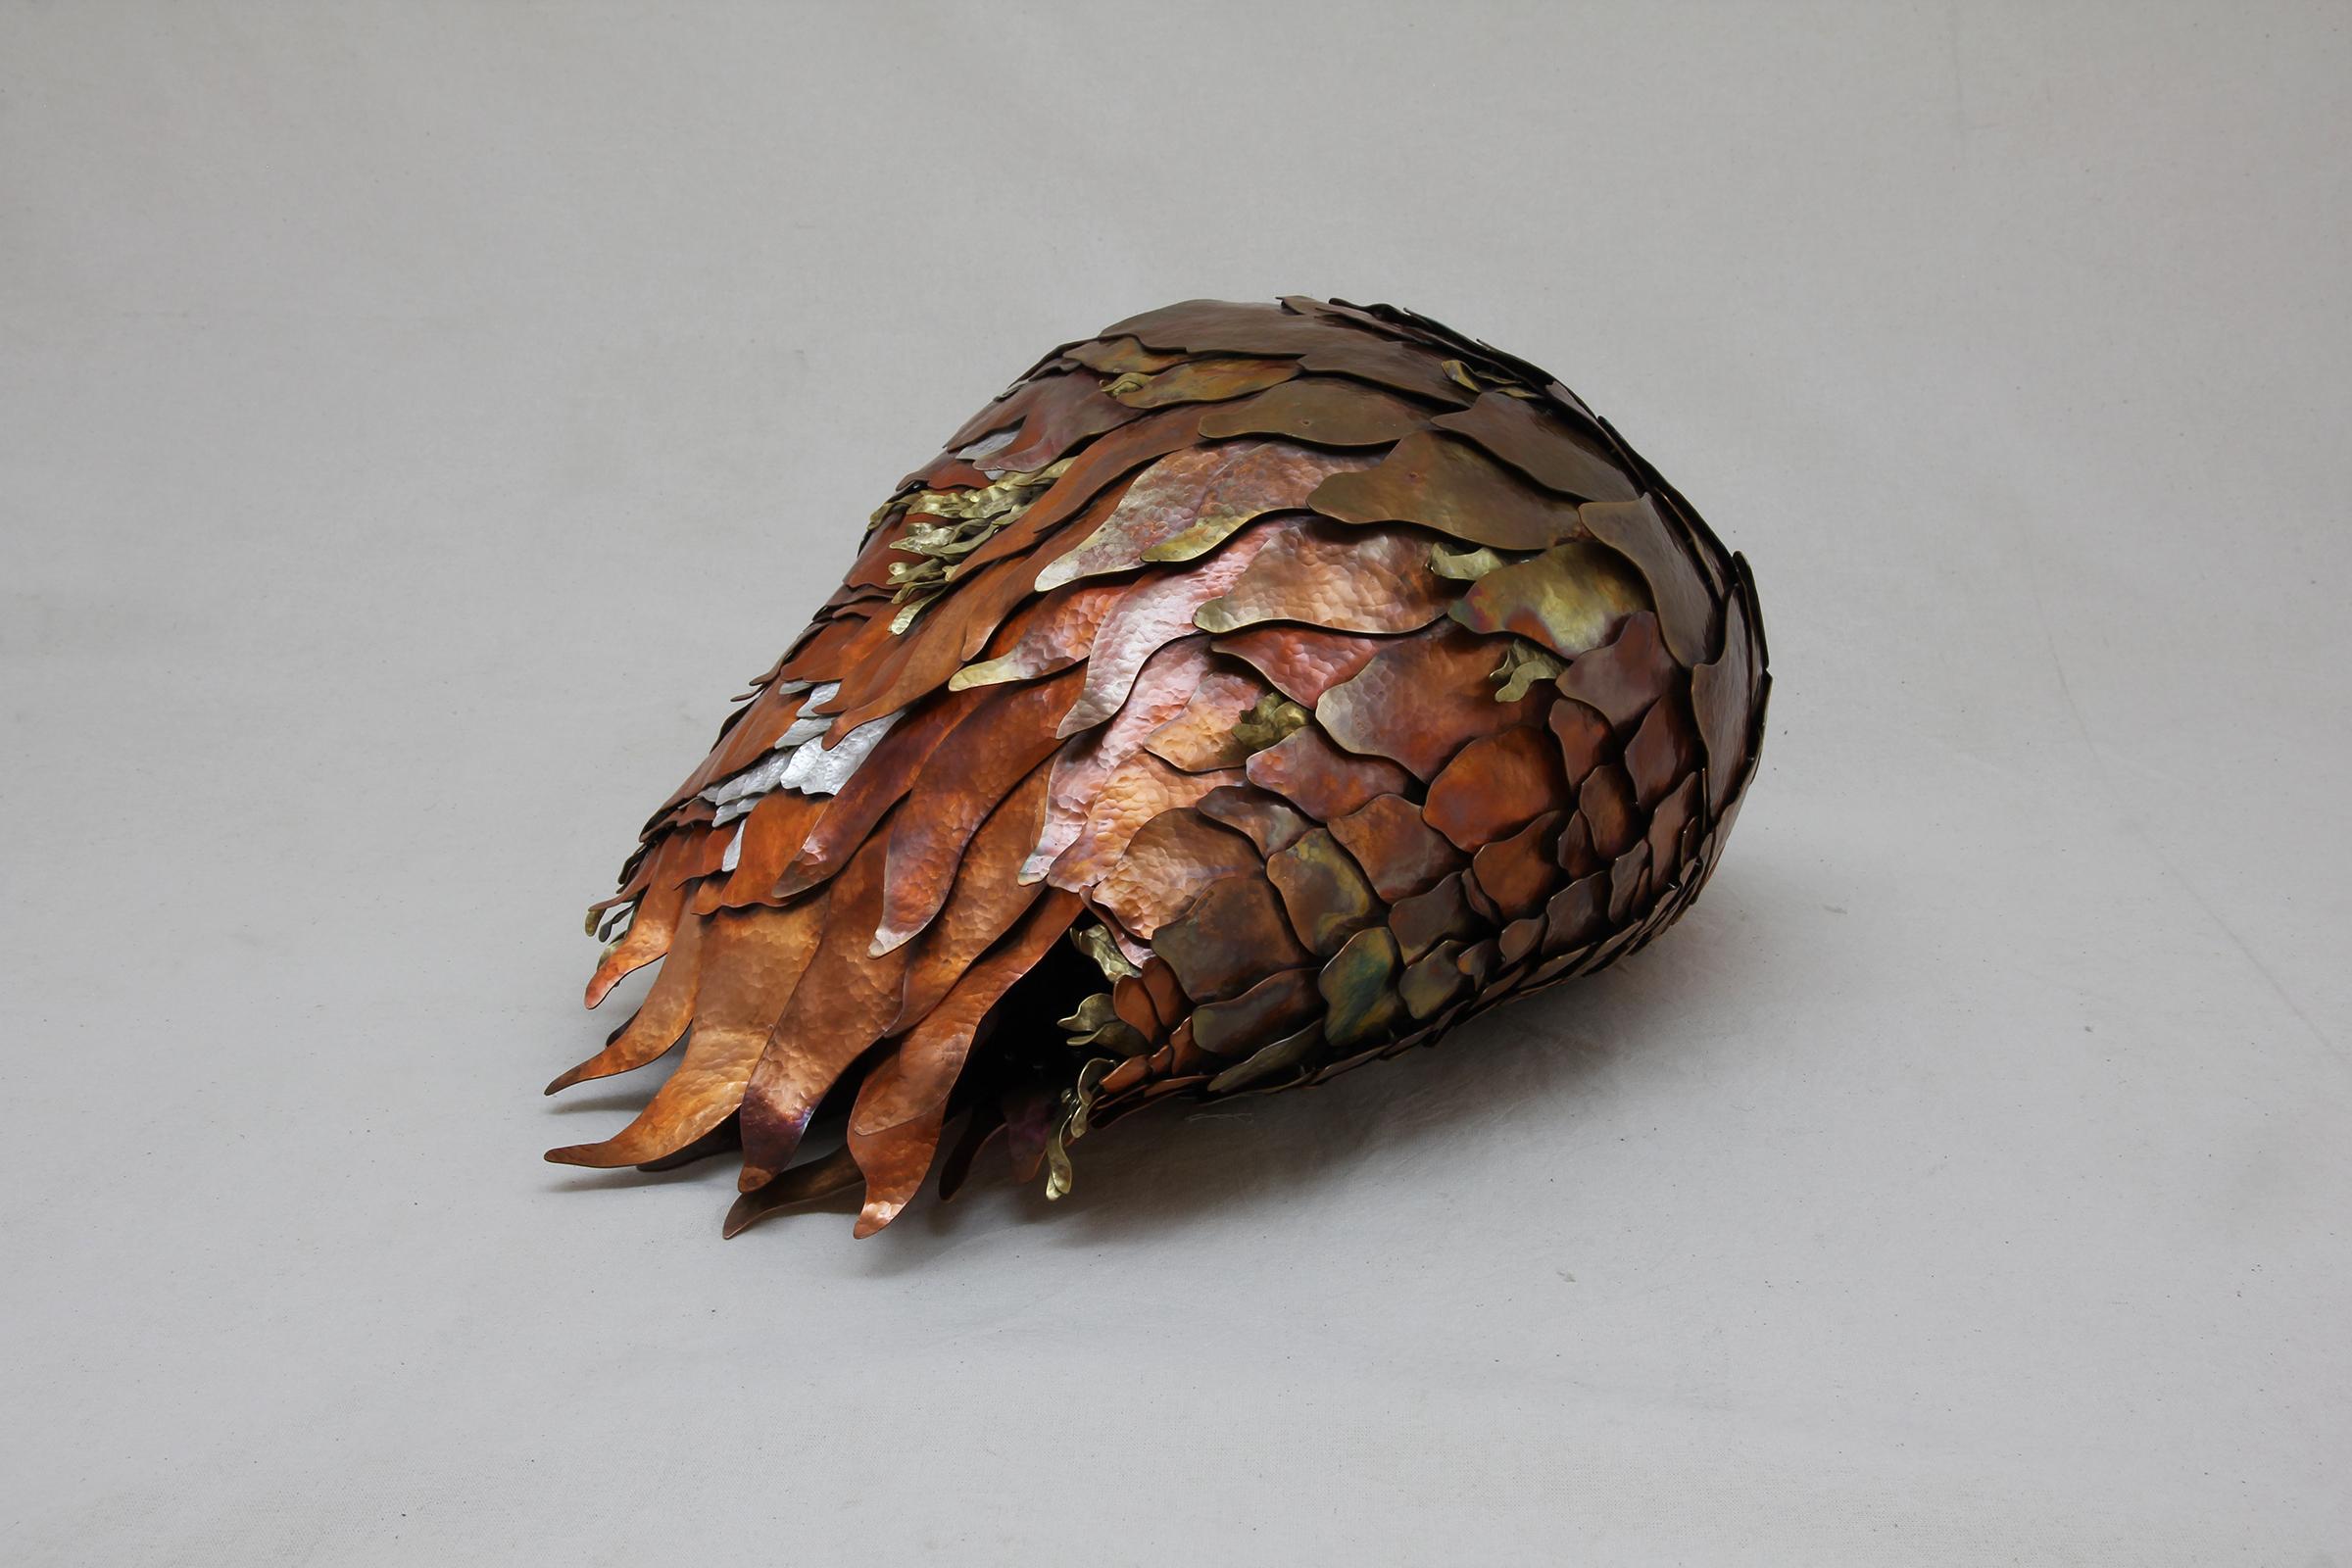 Inspired by organic forms found in nature, this abstract sculpture designed by Eduardo Herrera and crafted in silver .950, heat treated copper and tumbaga (an alloy of copper and zinc), each link on this piece is hand hammerer, cut and welded by